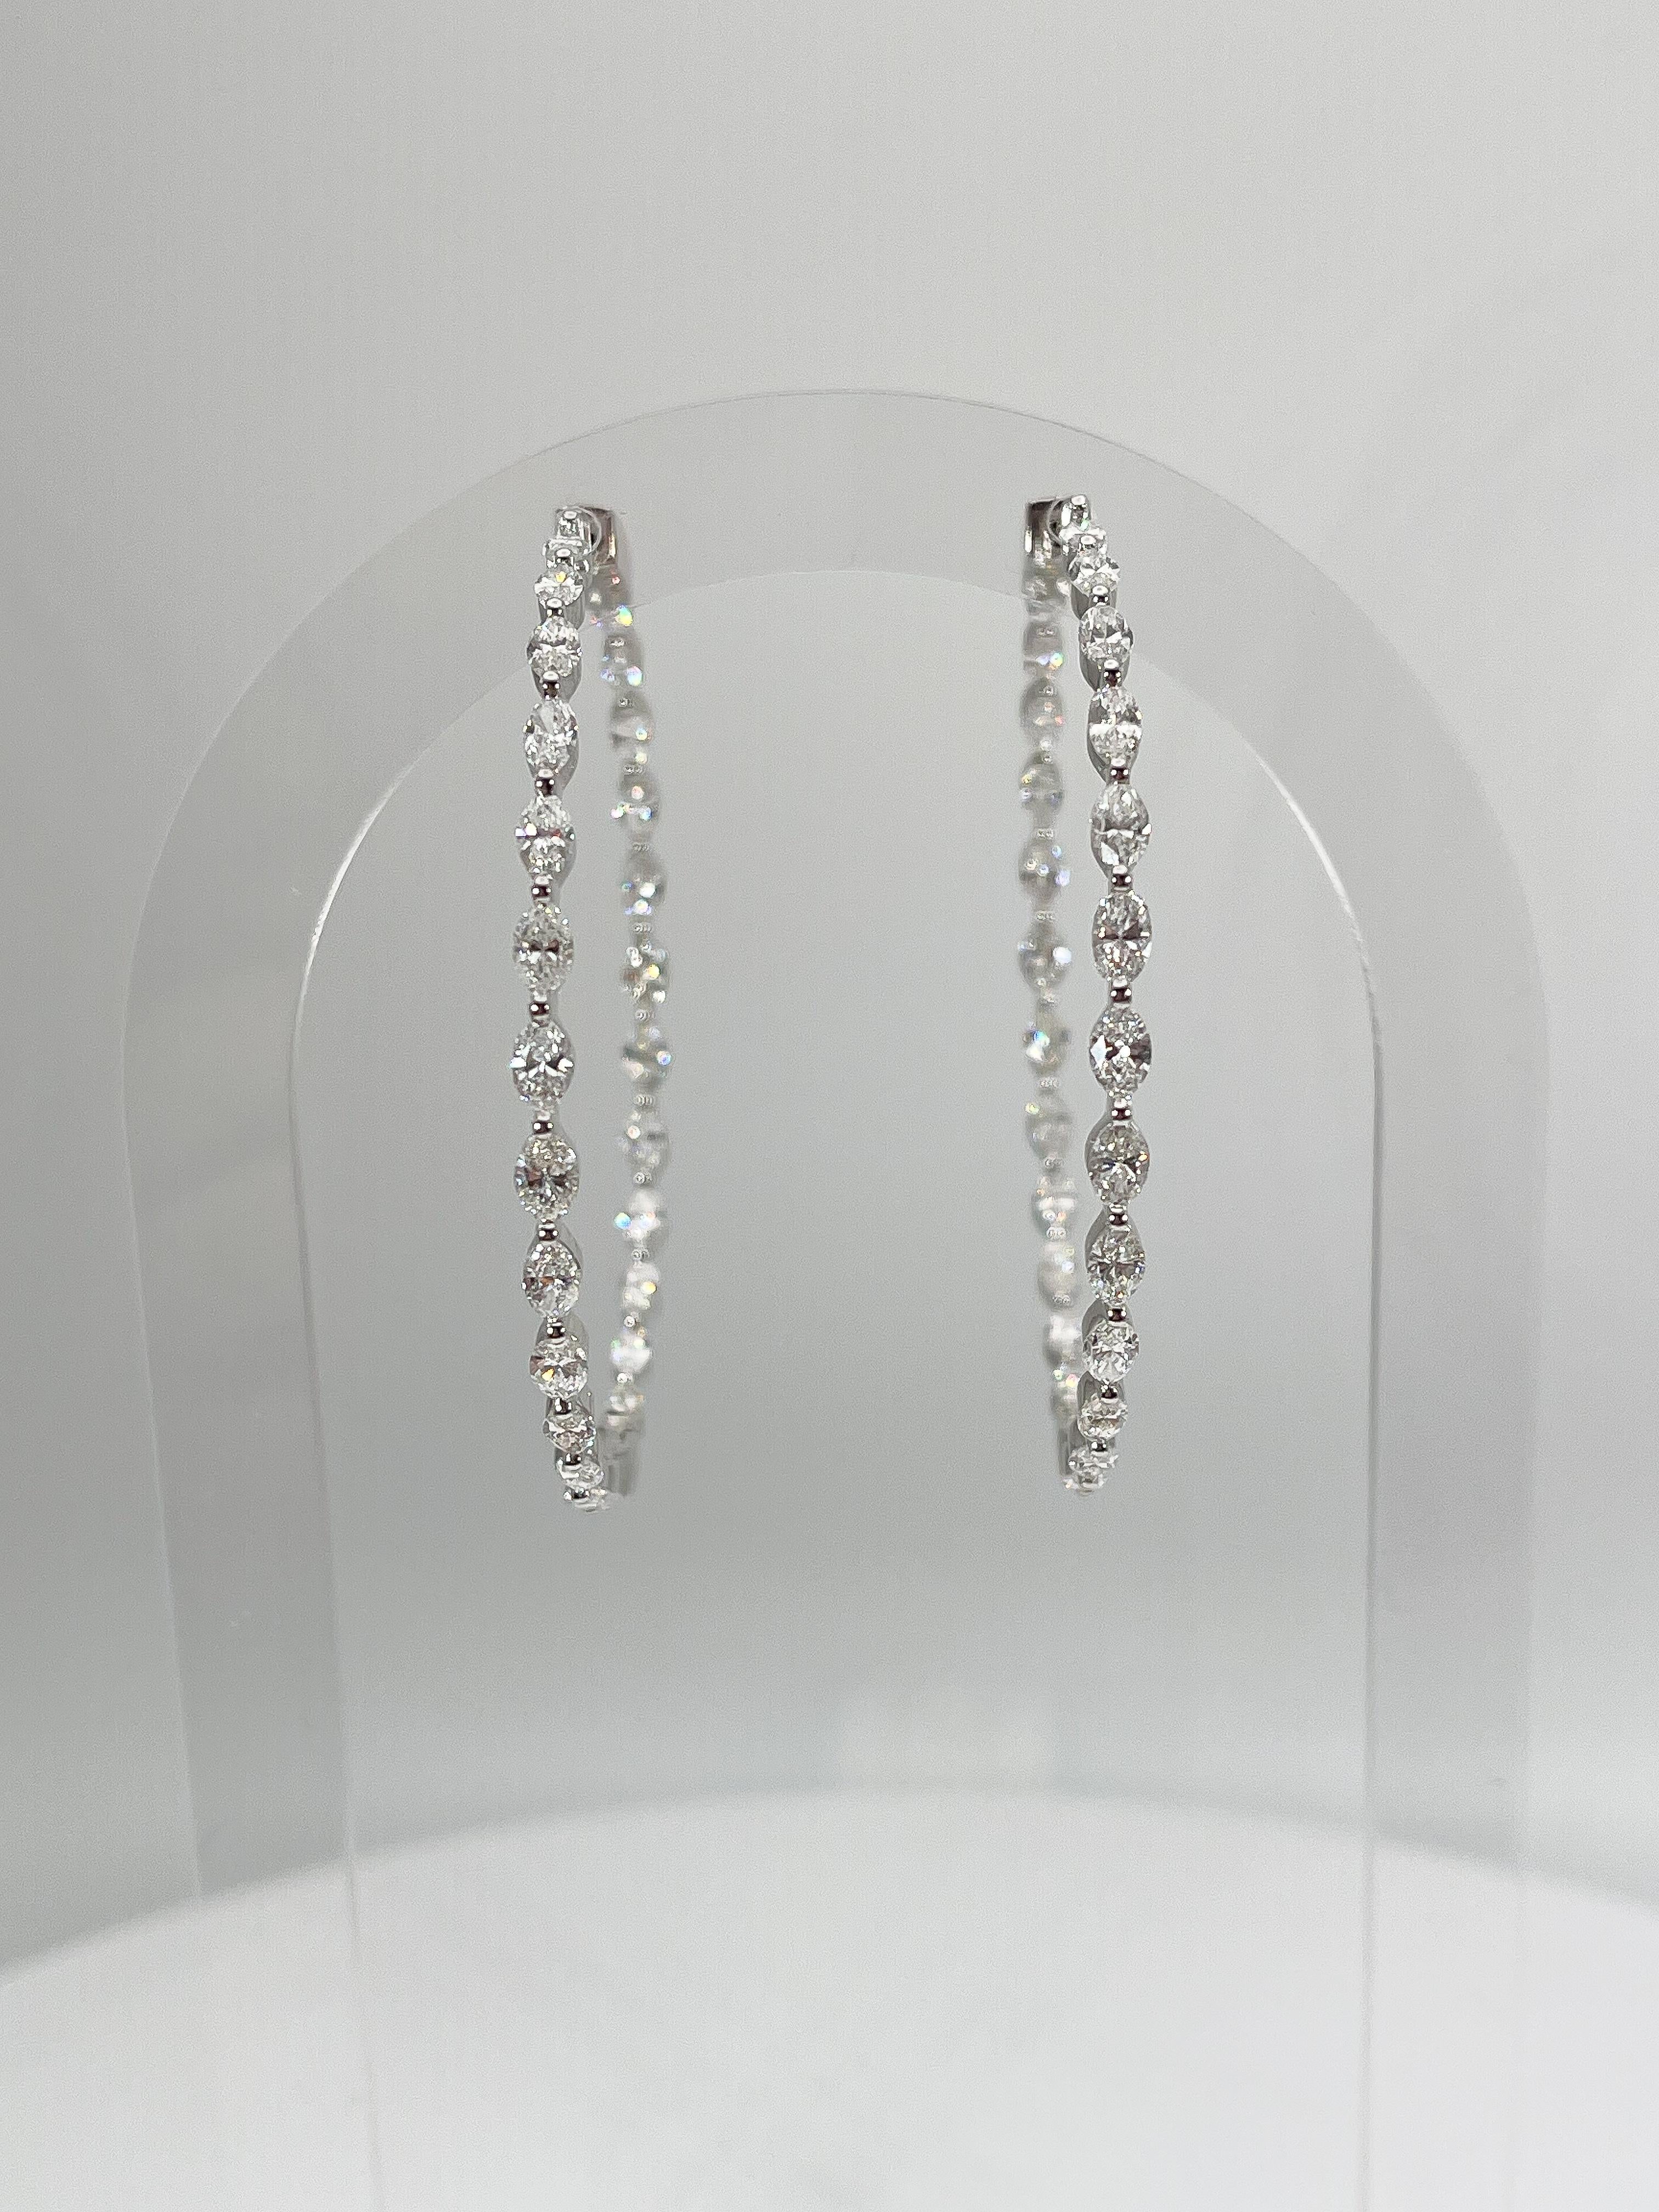 These 18K white gold x/large hoop earrings have 26 marquise cut diamonds going around each earring equaling 52 VS2 F-G color diamonds. These earrings have an inside diameter of 49.1 mm and have a total weight of 14.8 grams.